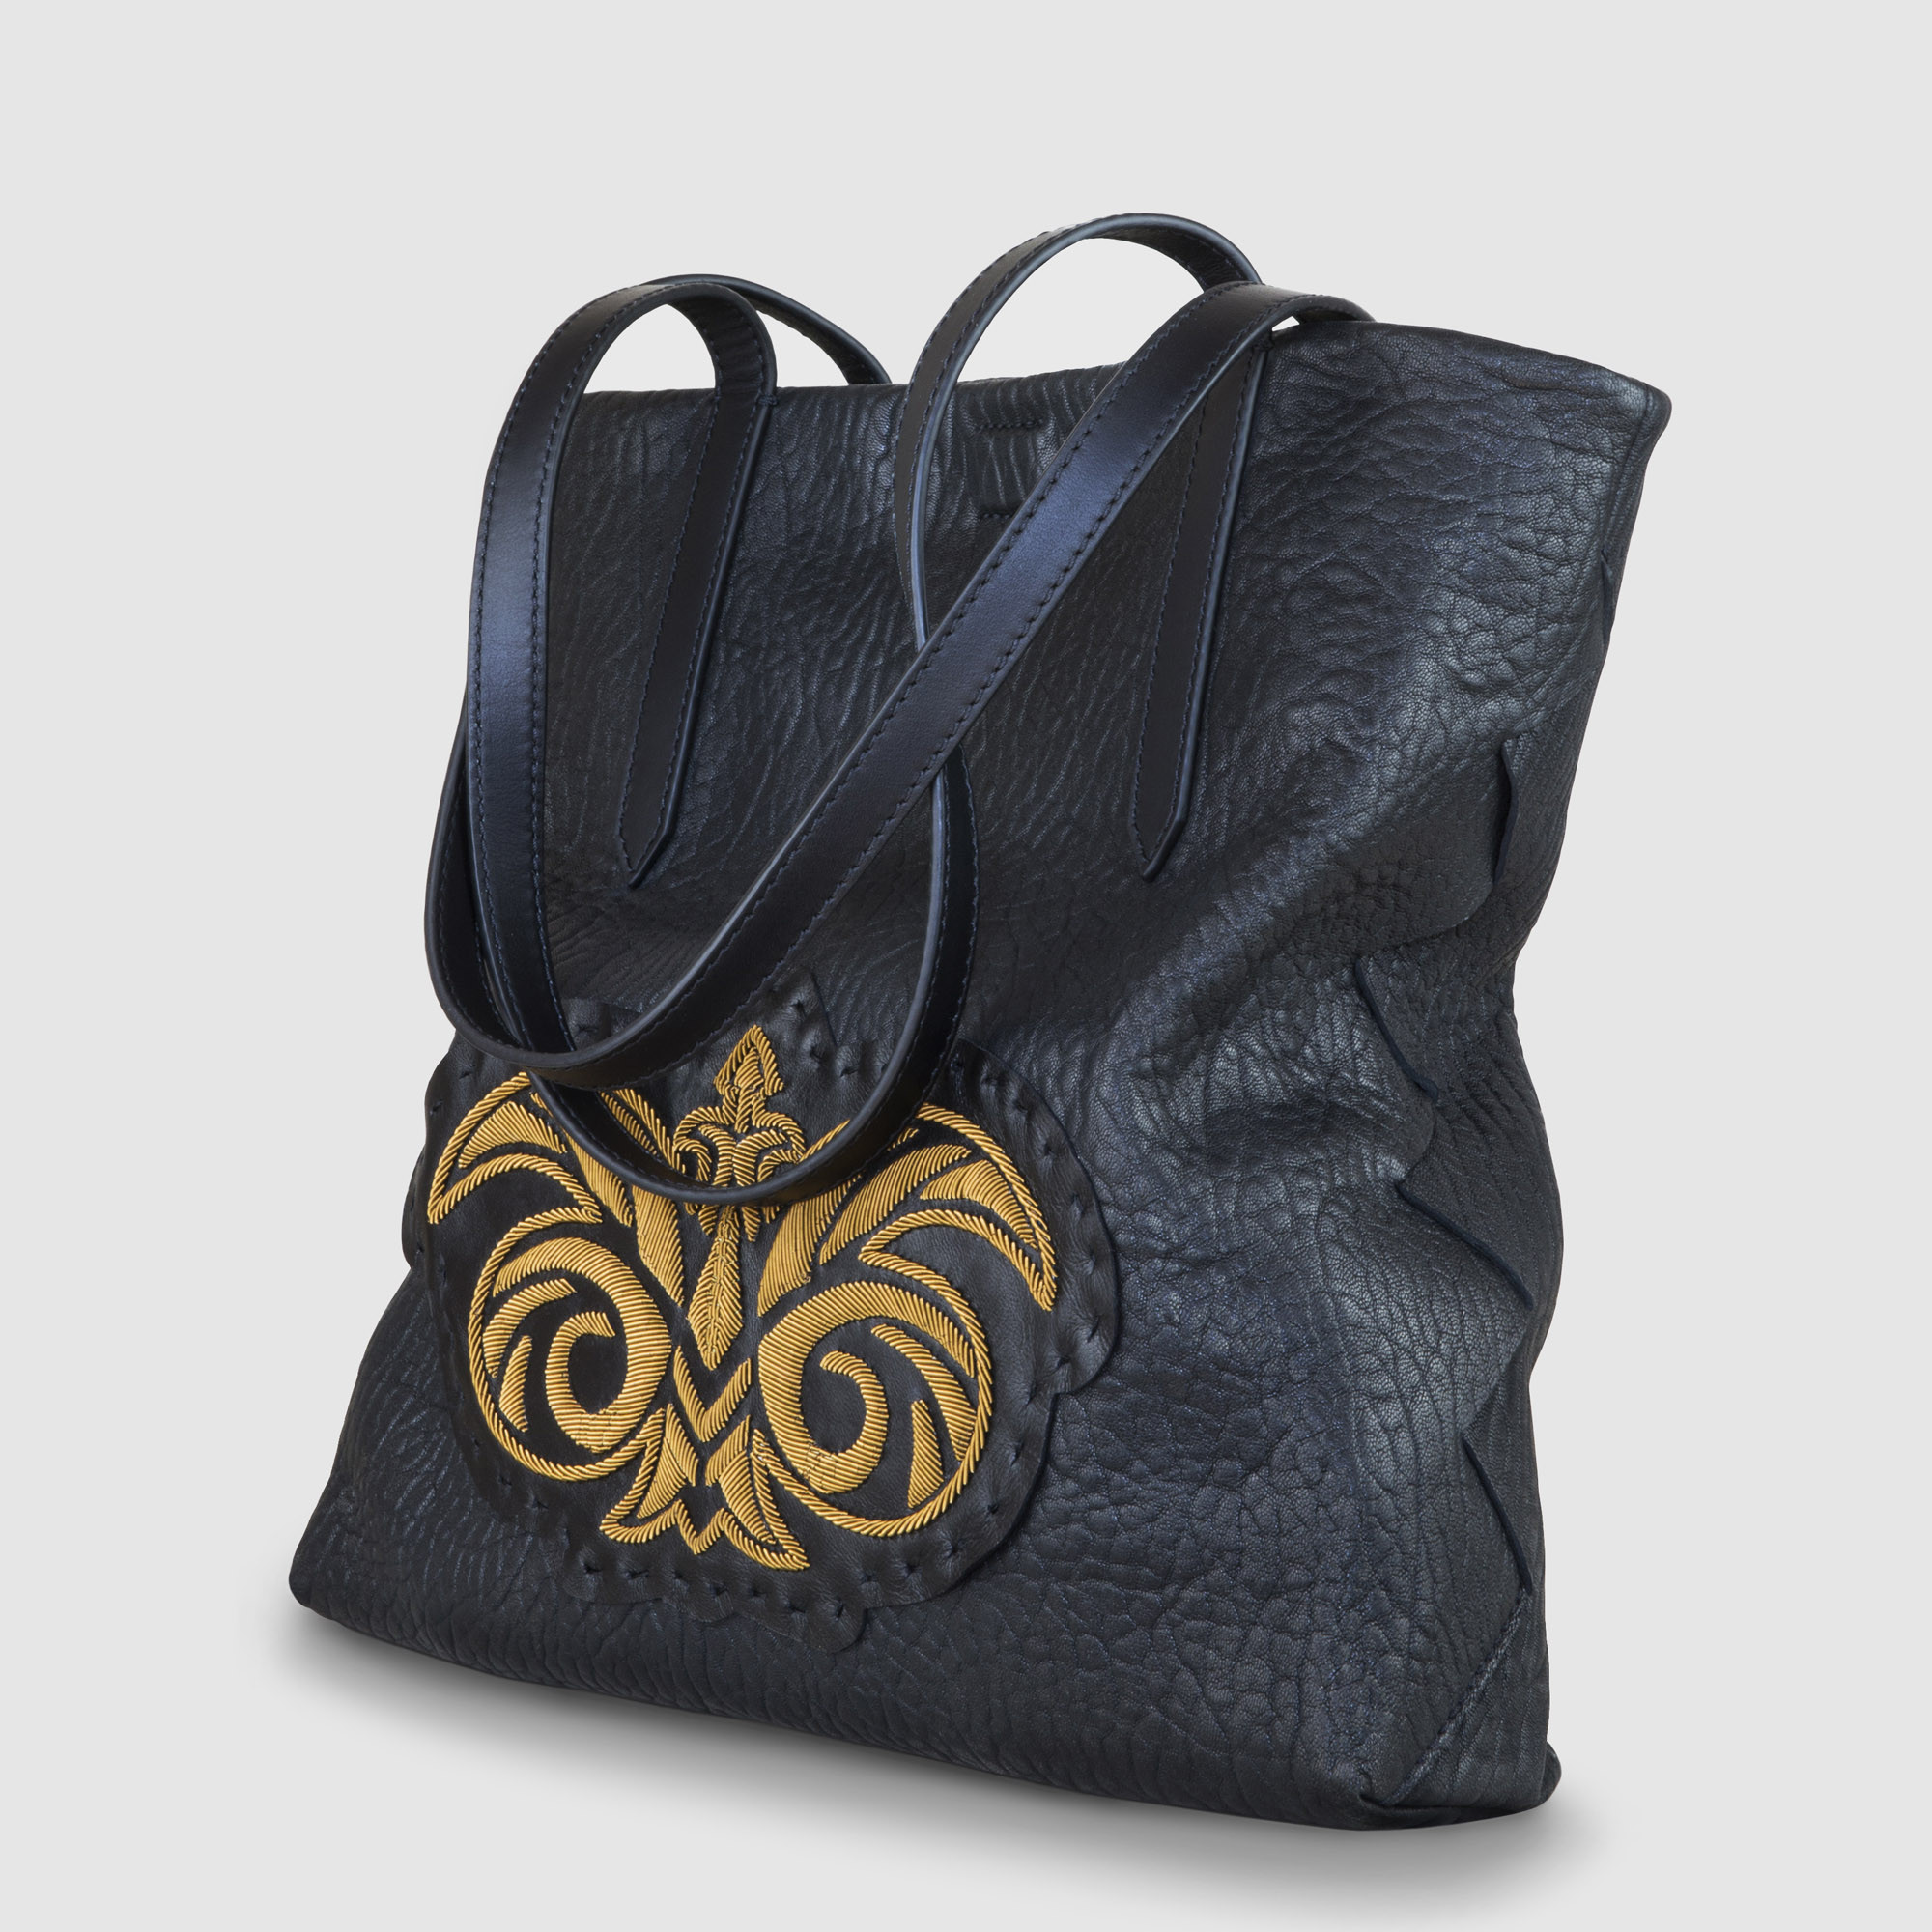 Soft lamb shopper ”Suzanne” M, black color embellished with antique gold cannetille - side view